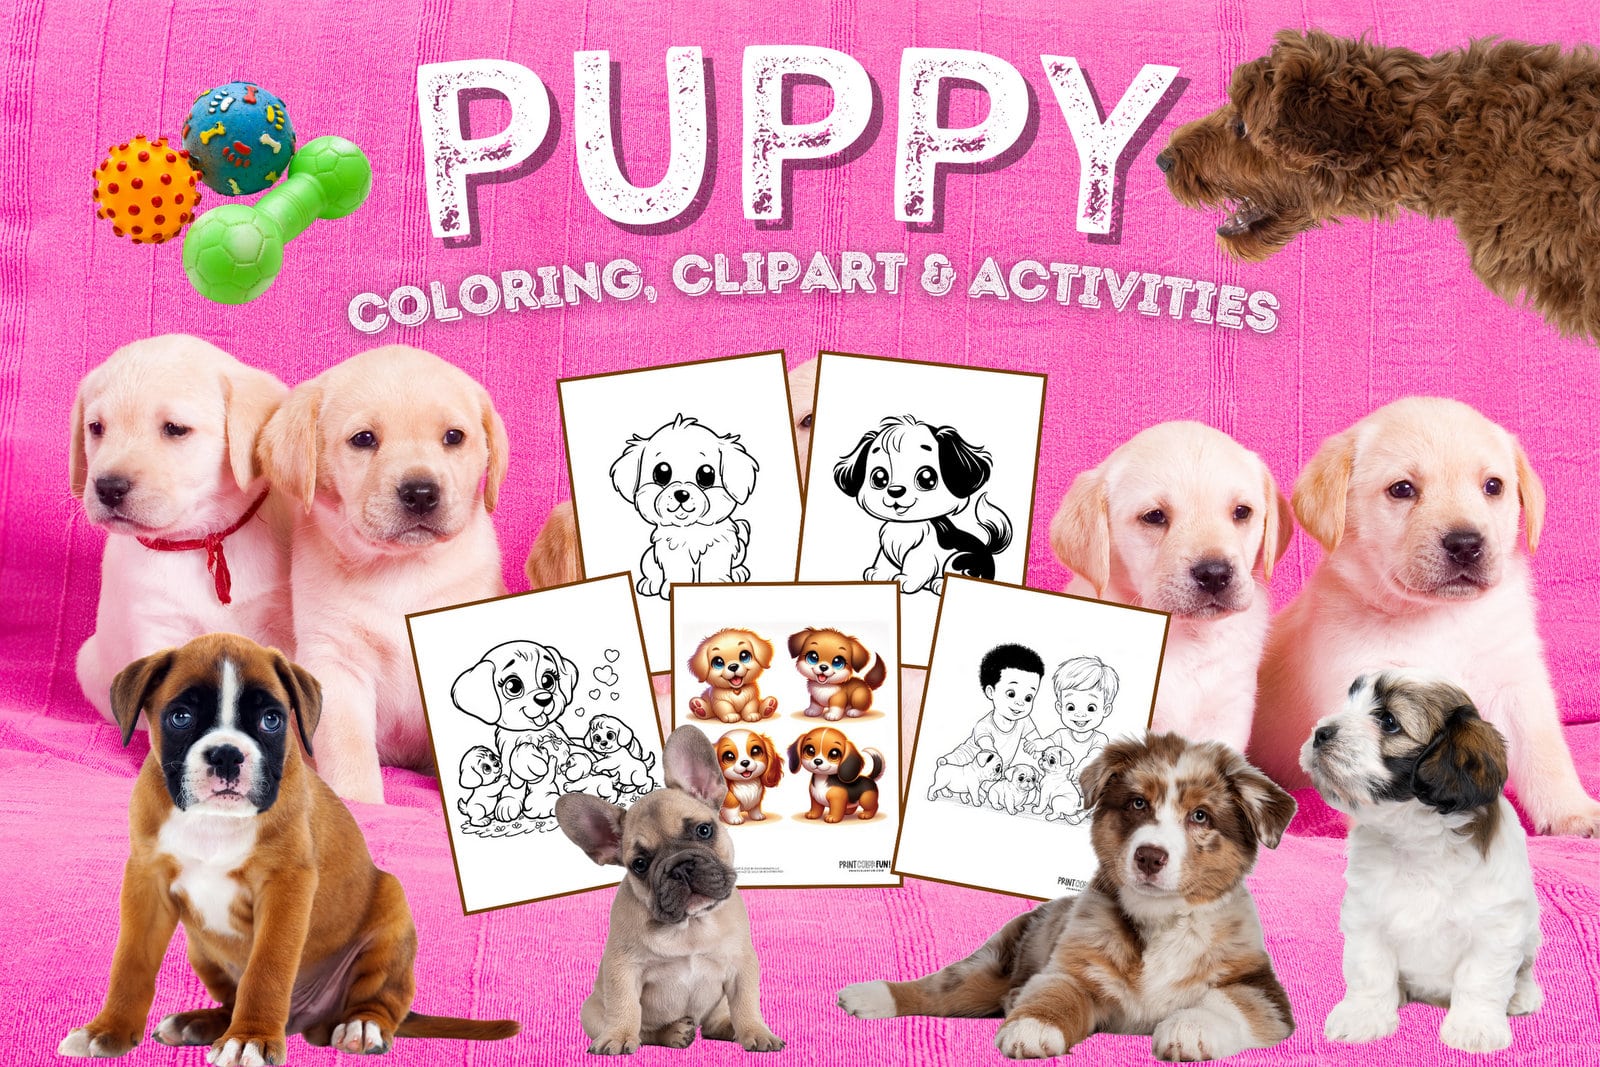 Puppy coloring page clipart activities from PrintColorFun com